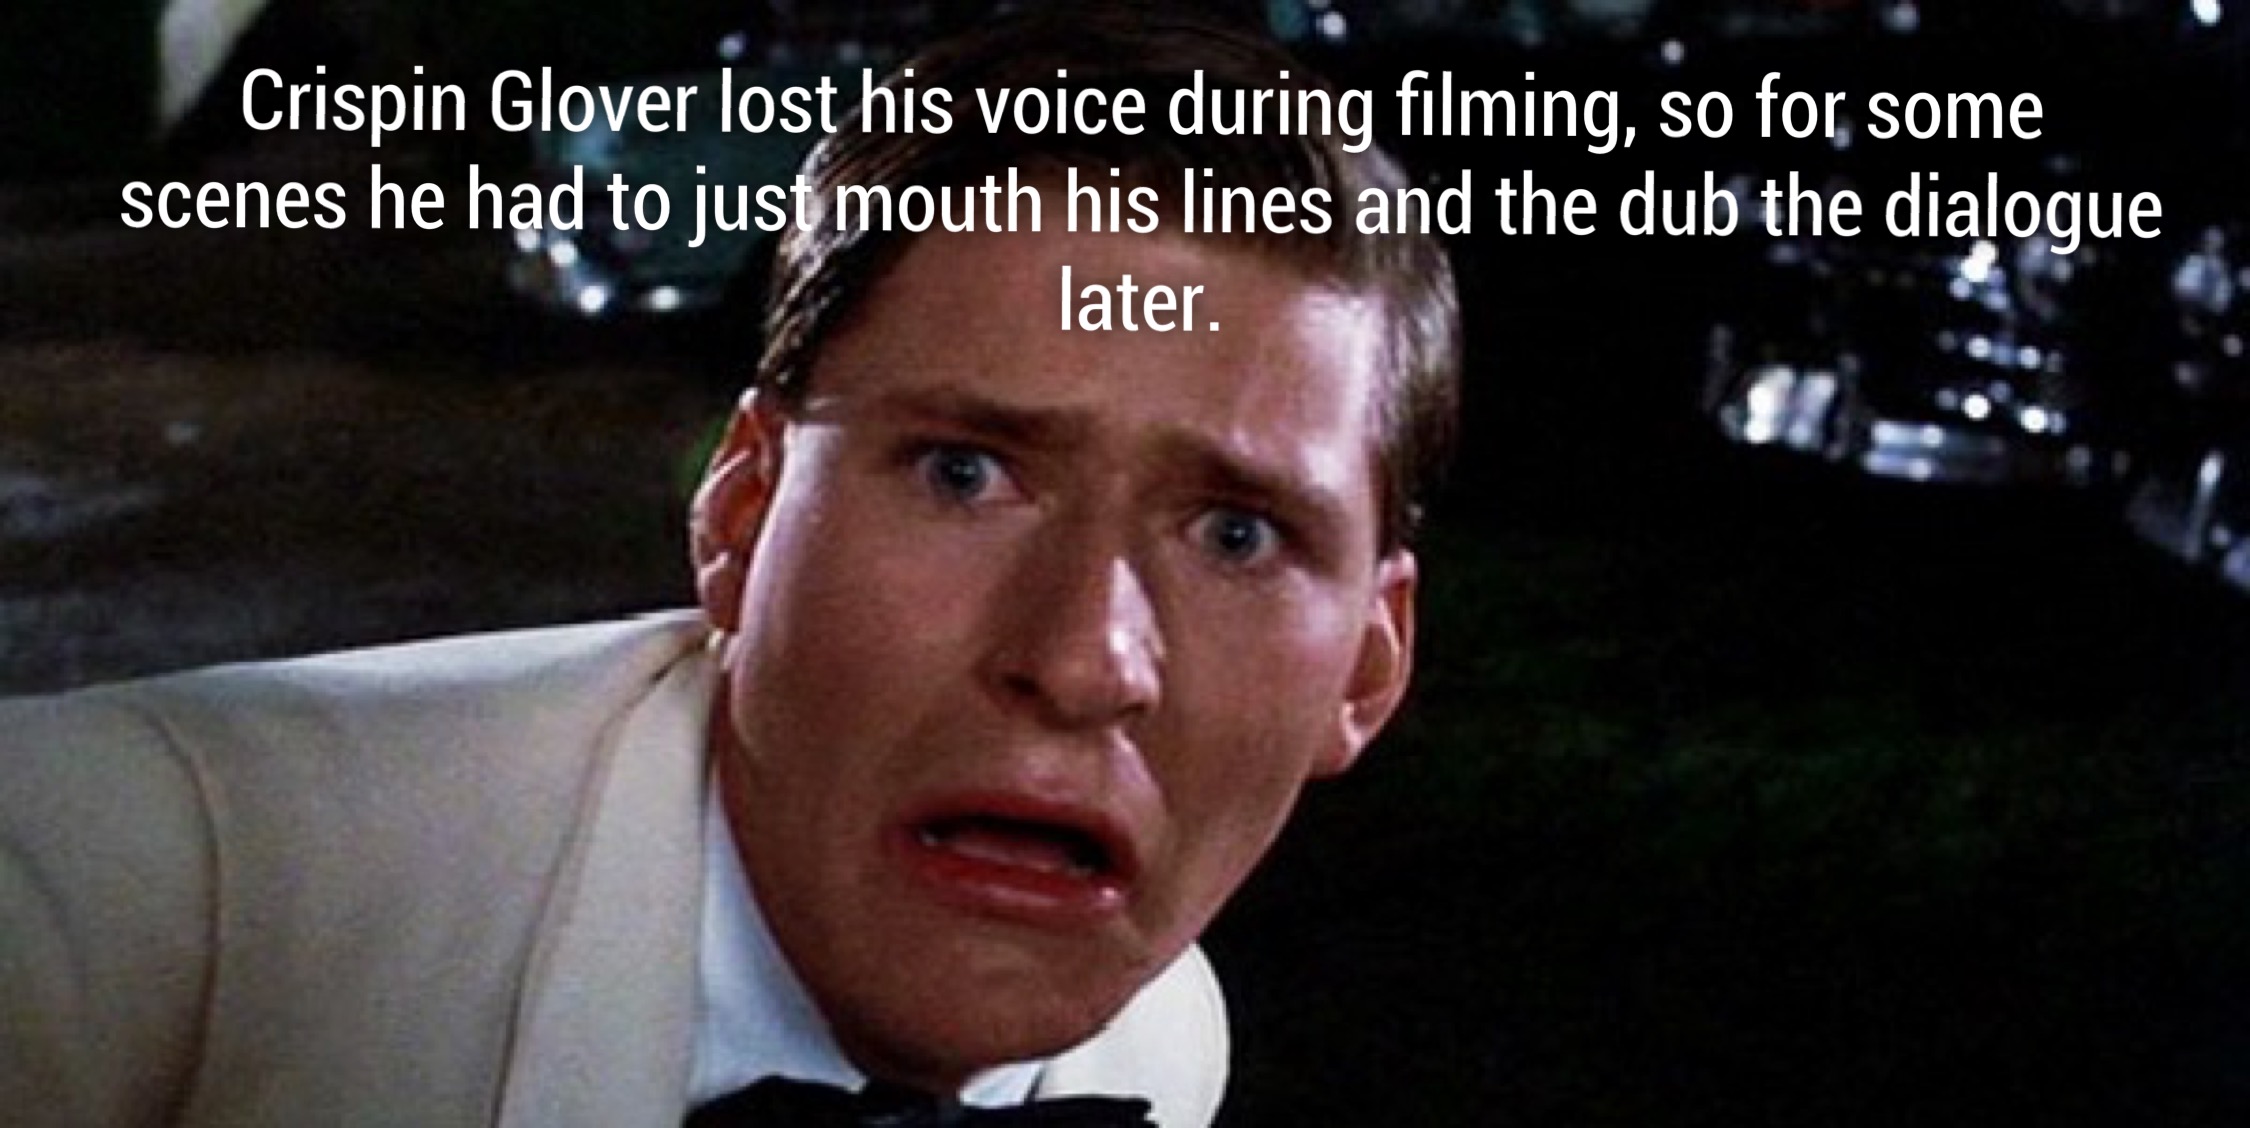 george mcfly - Crispin Glover lost his voice during filming, so for some scenes he had to just mouth his lines and the dub the dialogue later.